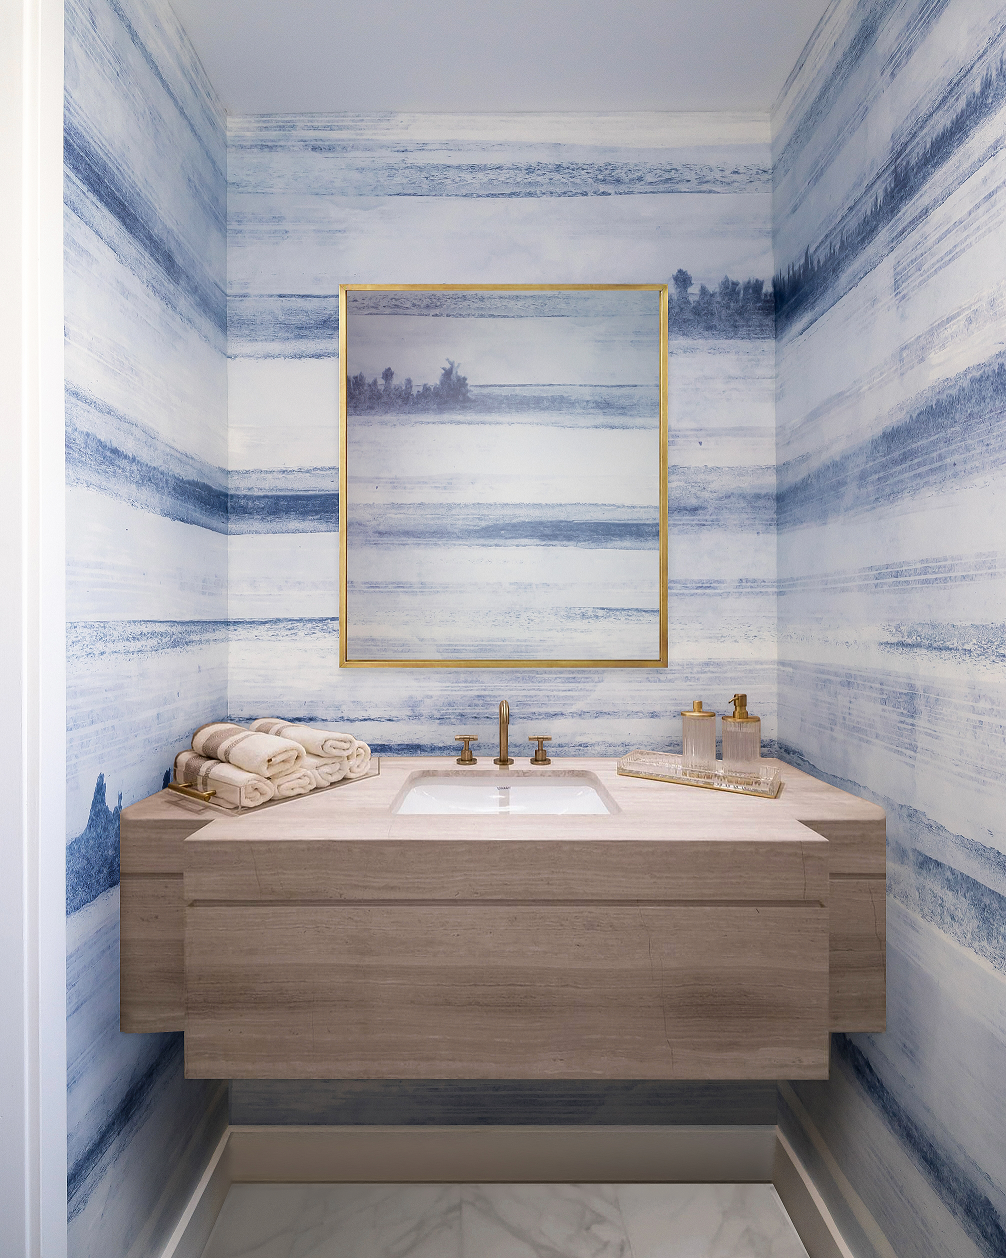 A powder room with ombre blue wallpaper mural